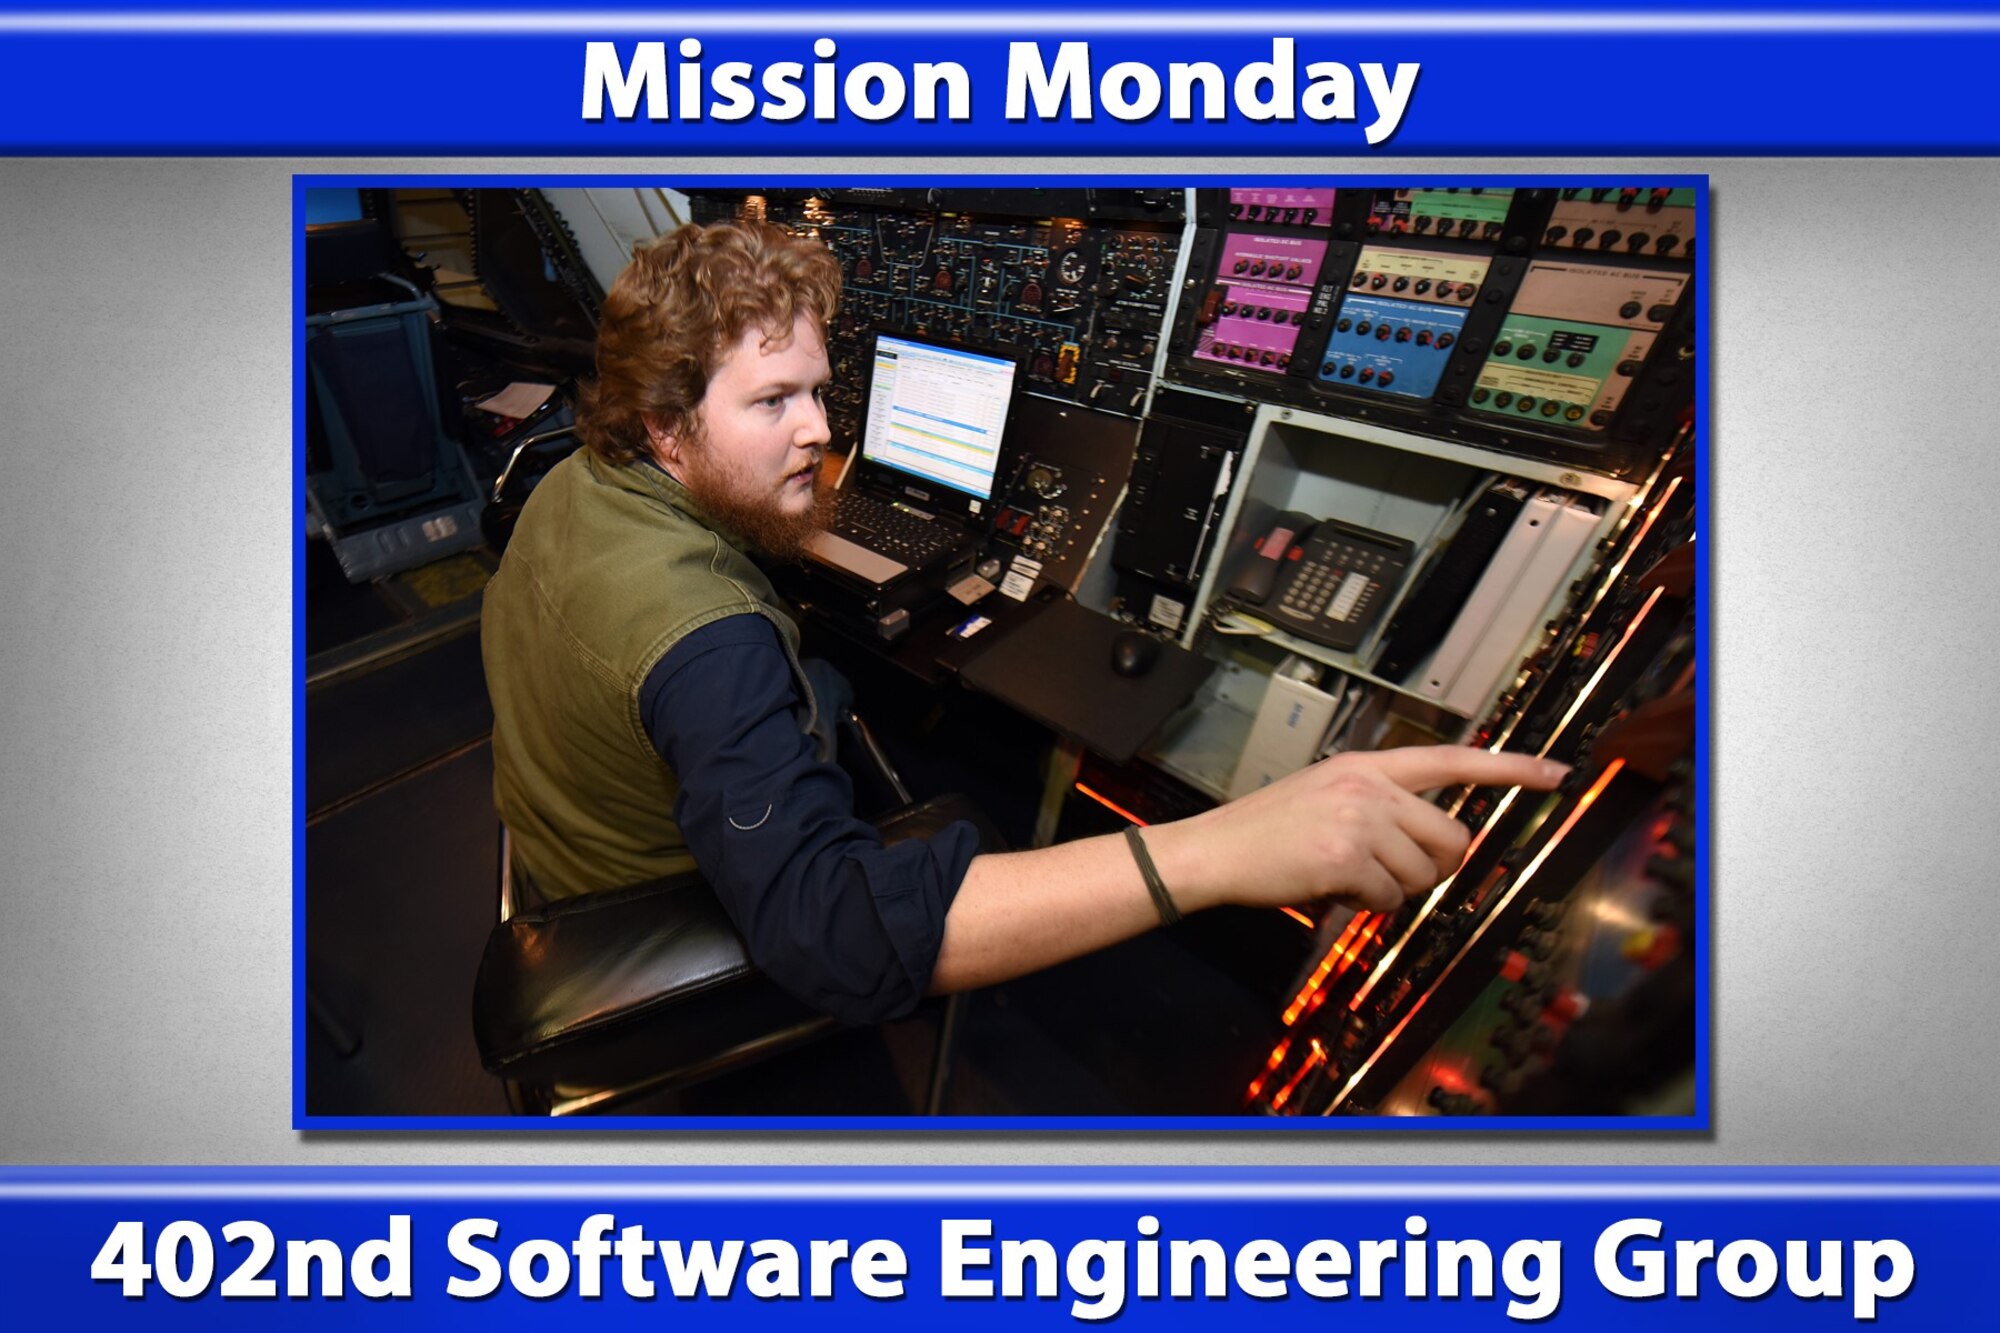 Mission Monday: 402nd Software Engineering Group